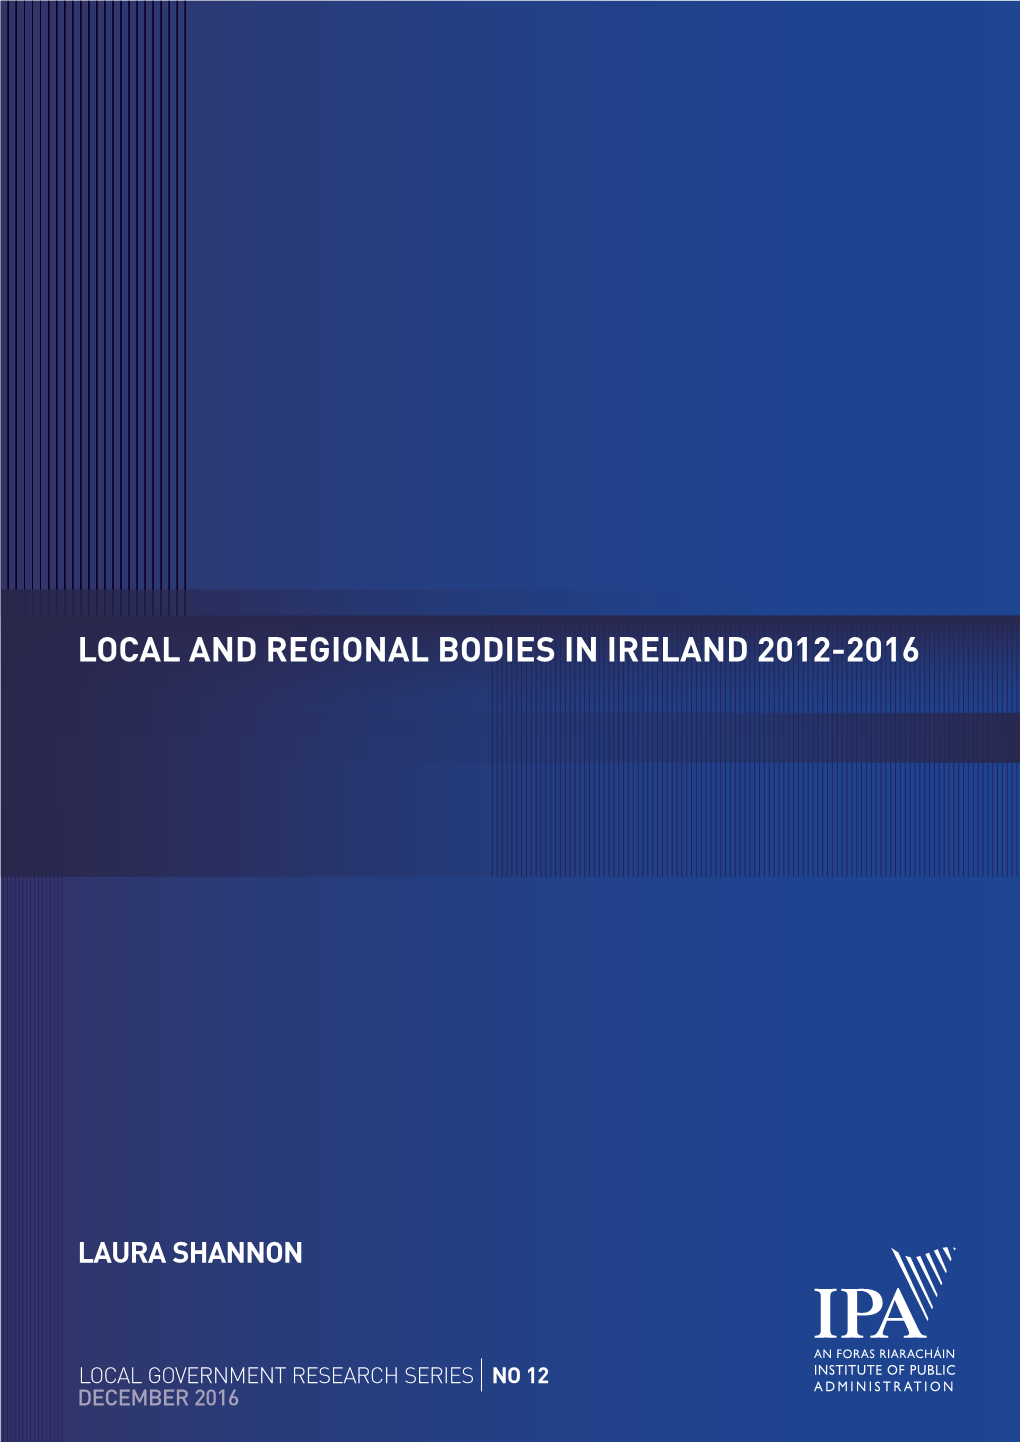 Local and Regional Bodies in Ireland 2012-2016